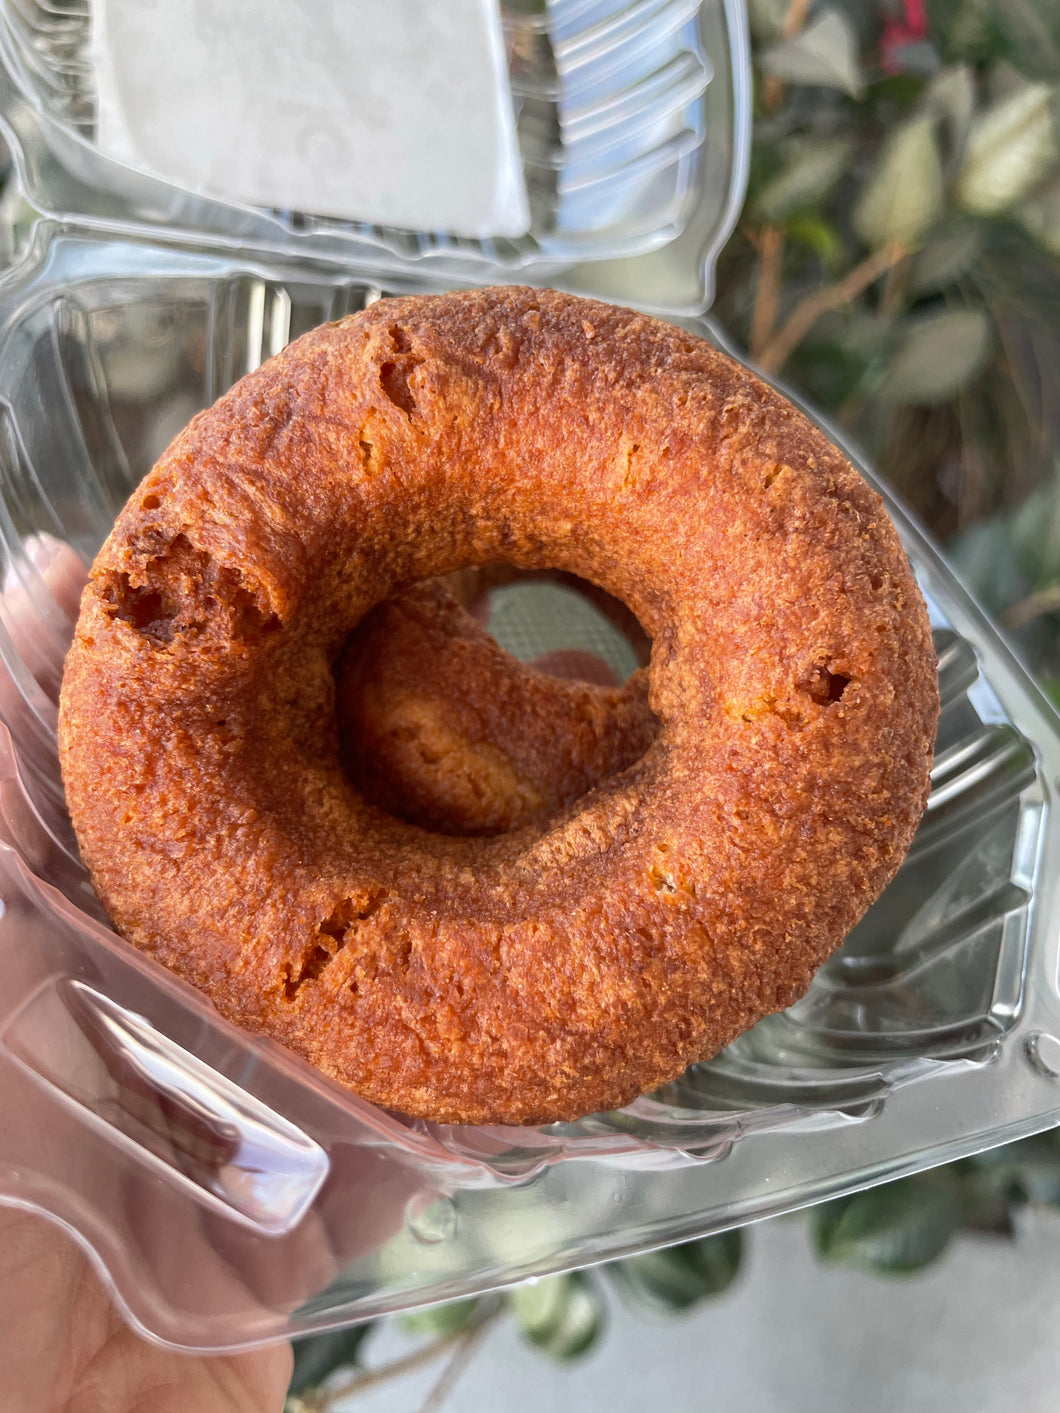 Fresh Baked Keto Donuts & Keto Cinnamon Rolls  (In Store Only)